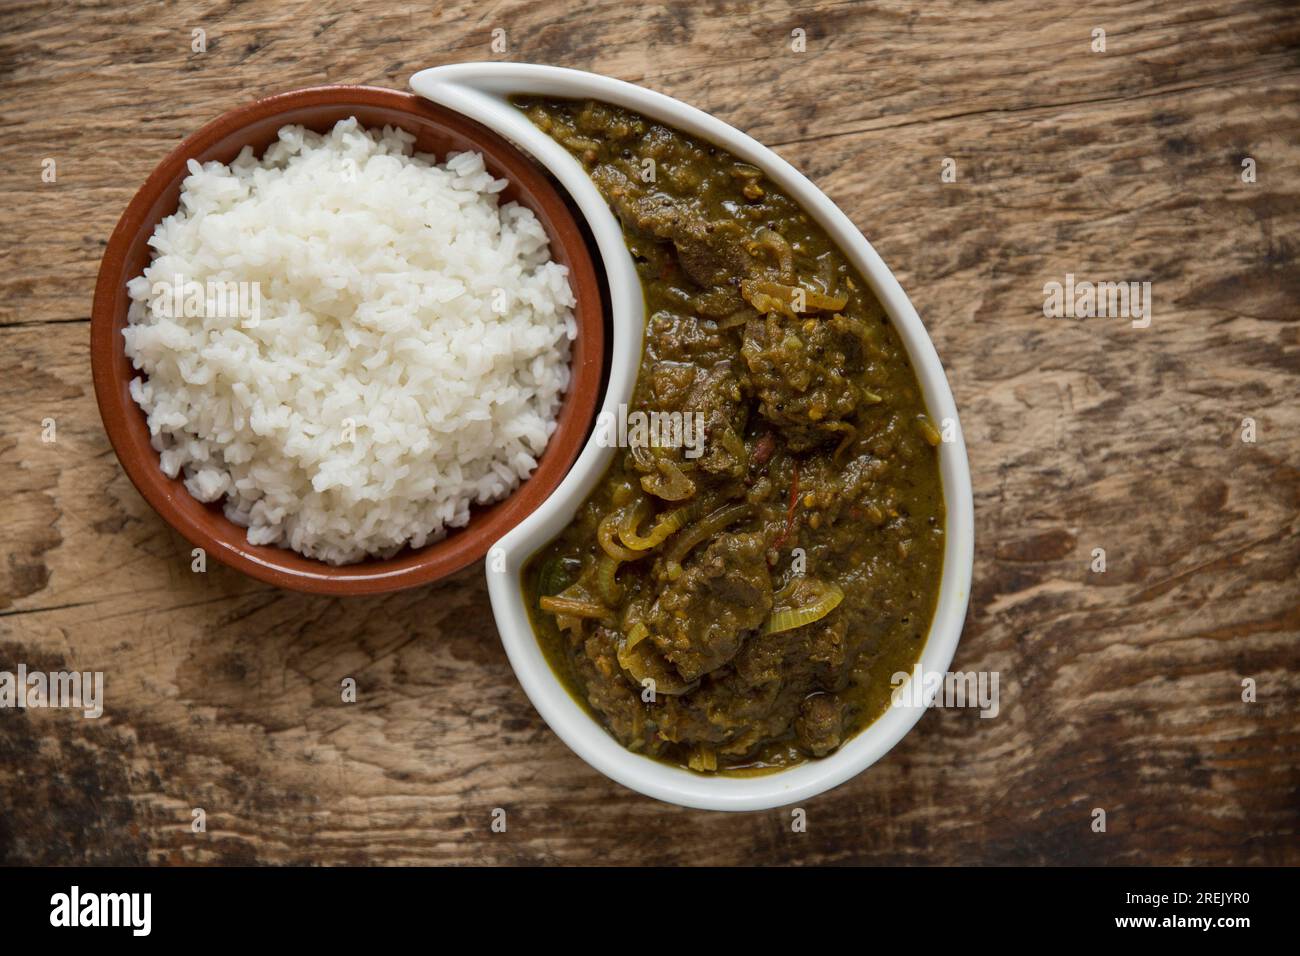 A curry made with woodpigeon fillets served with white rice. Ingredients include onions, garlic and a range of spices. England UK GB Stock Photo